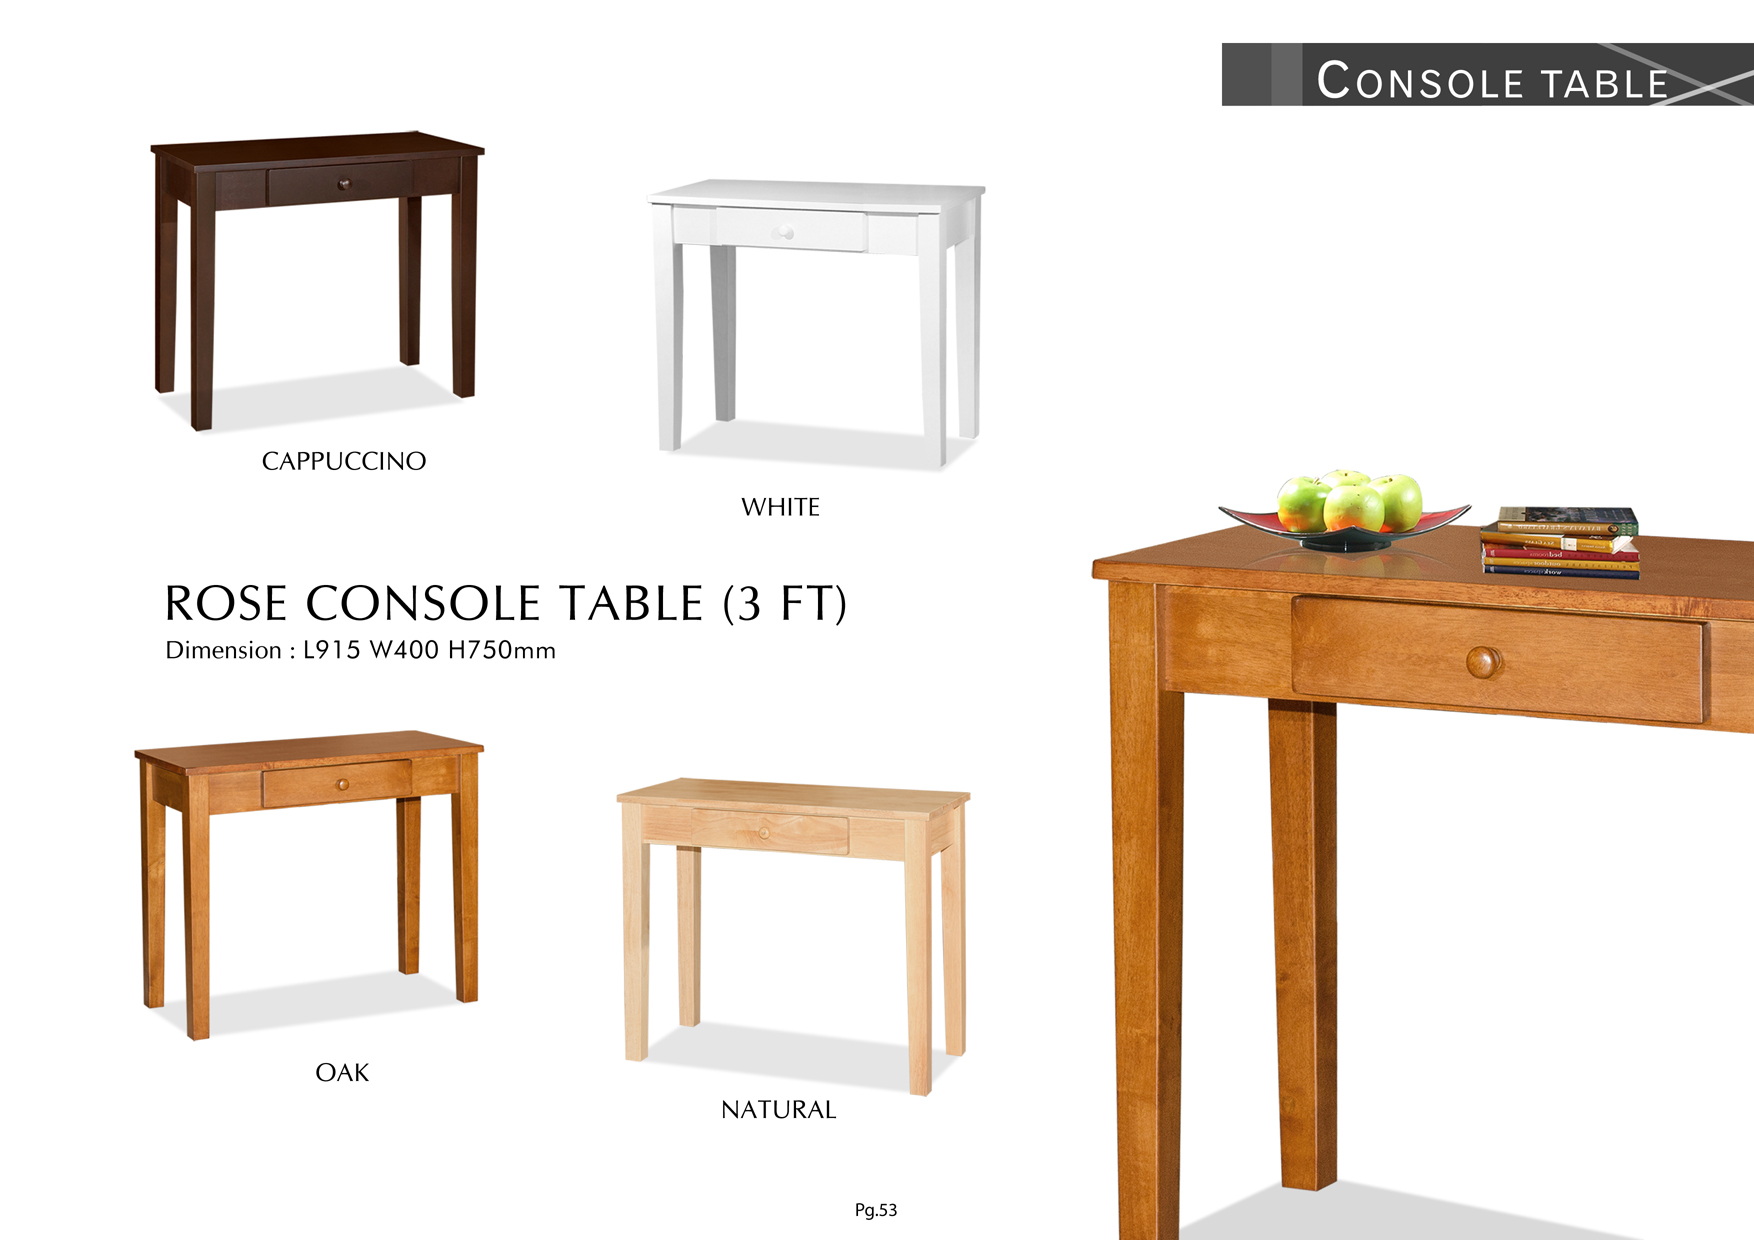 Product: PG53. ROSE CONSOLE TABLE 3FT